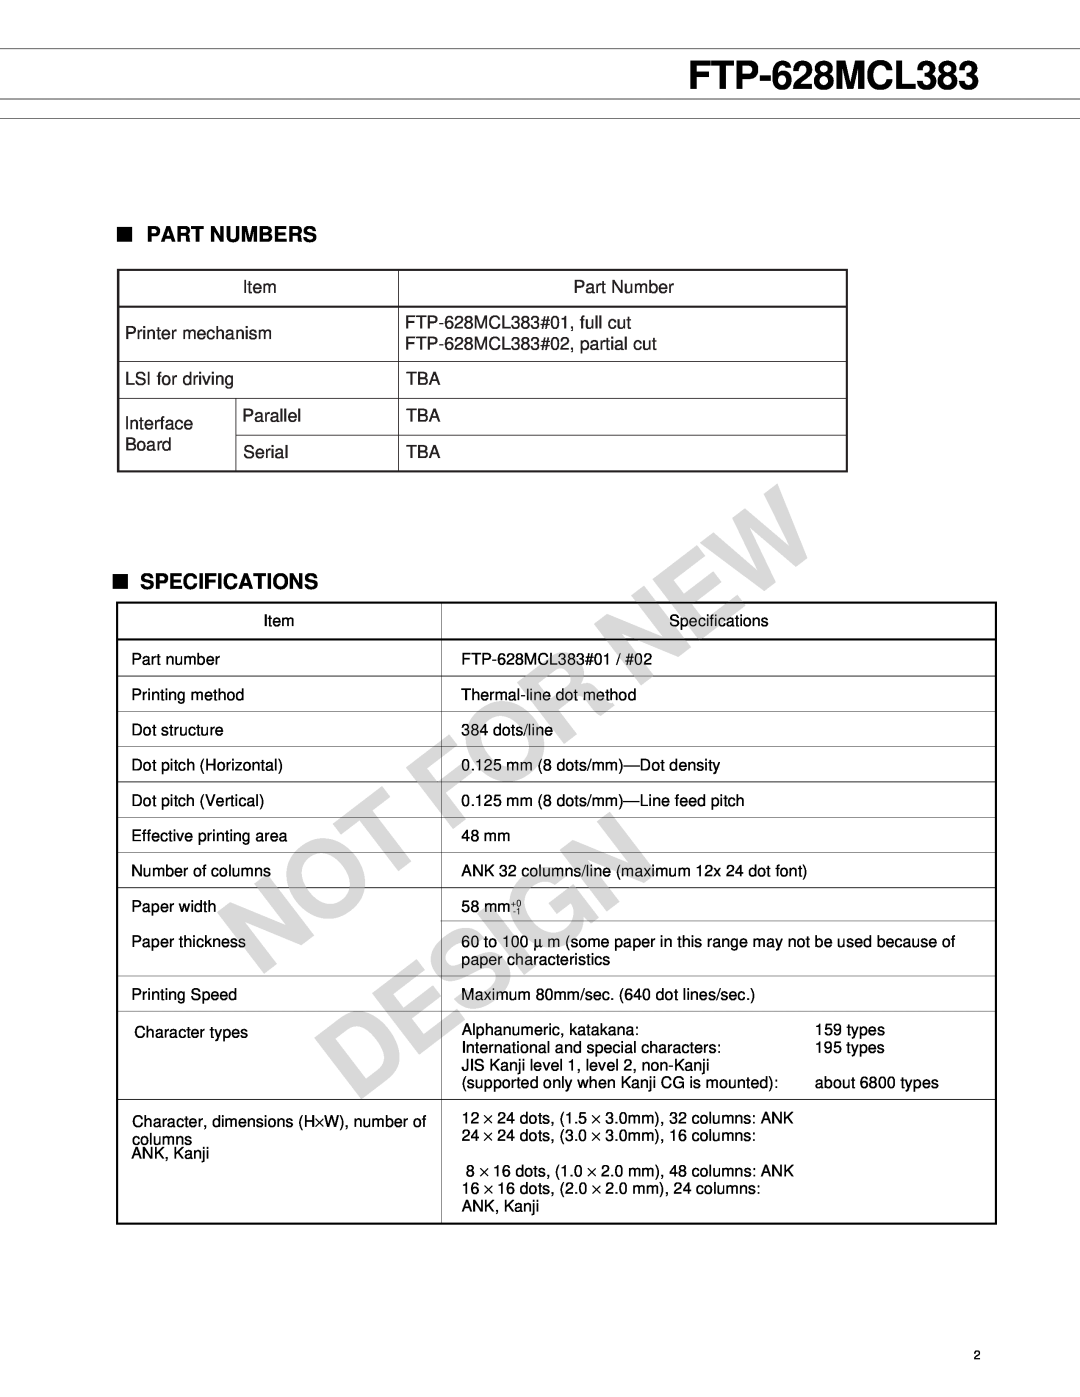 Fujitsu FTP628 MCL383 manual FTP-628MCL383, Part Numbers, Specifications, Design 